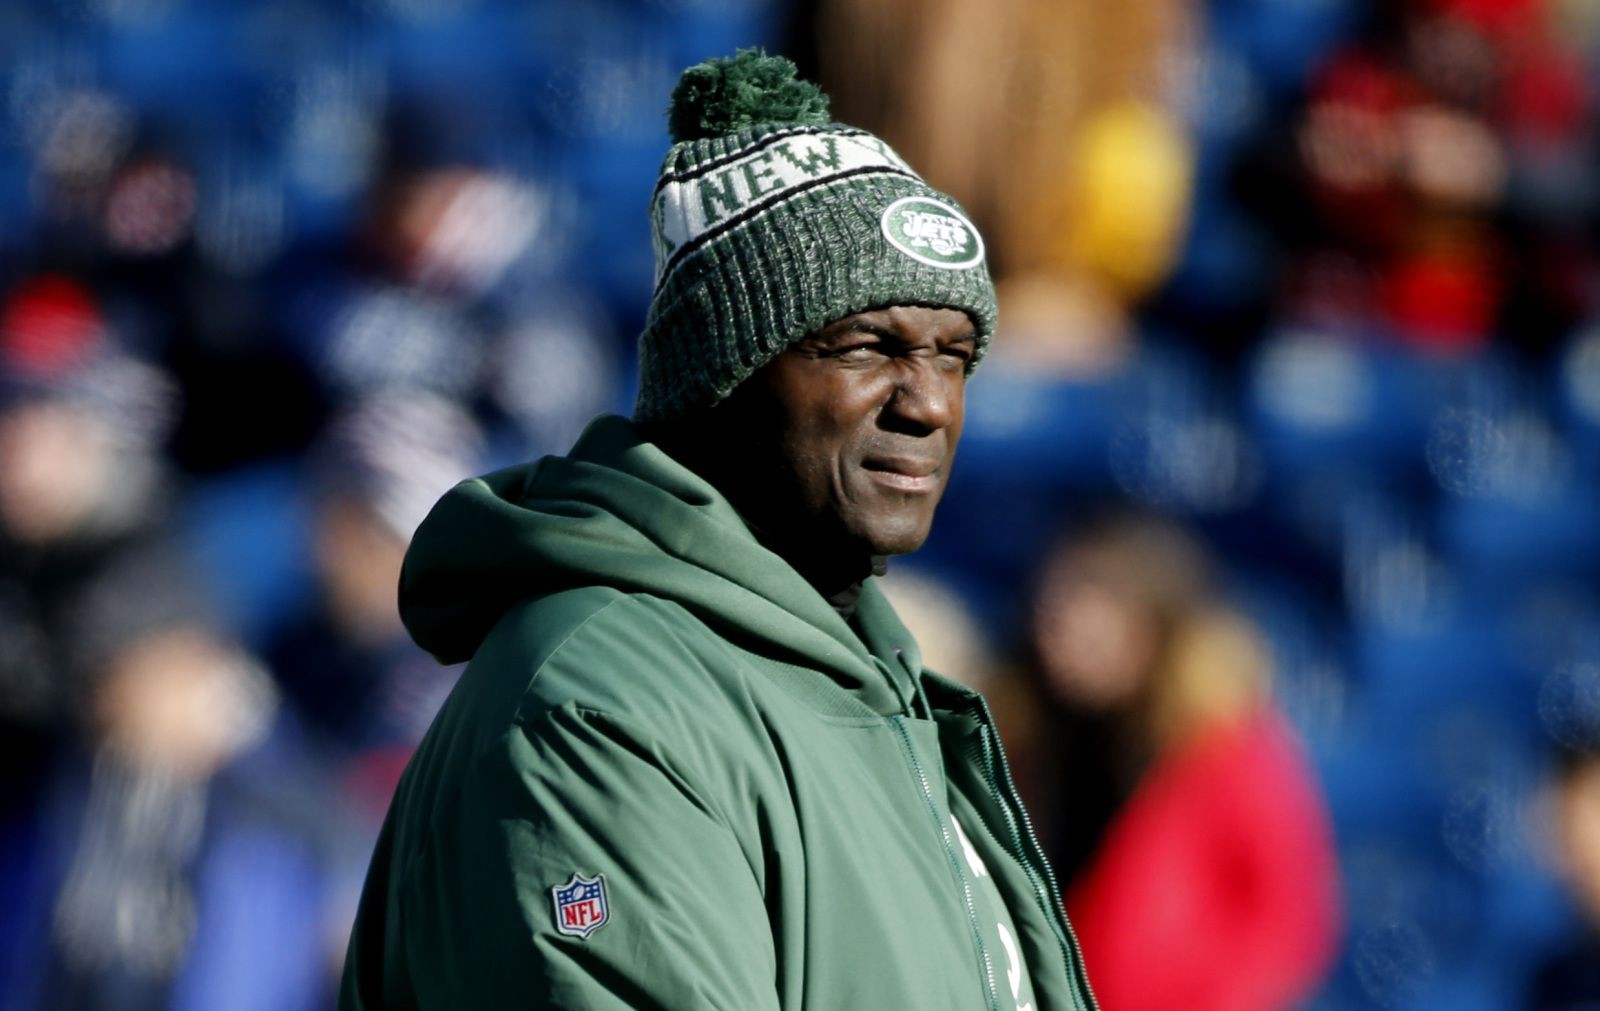 Redskins have met with former Jets HC Todd Bowles, per reports